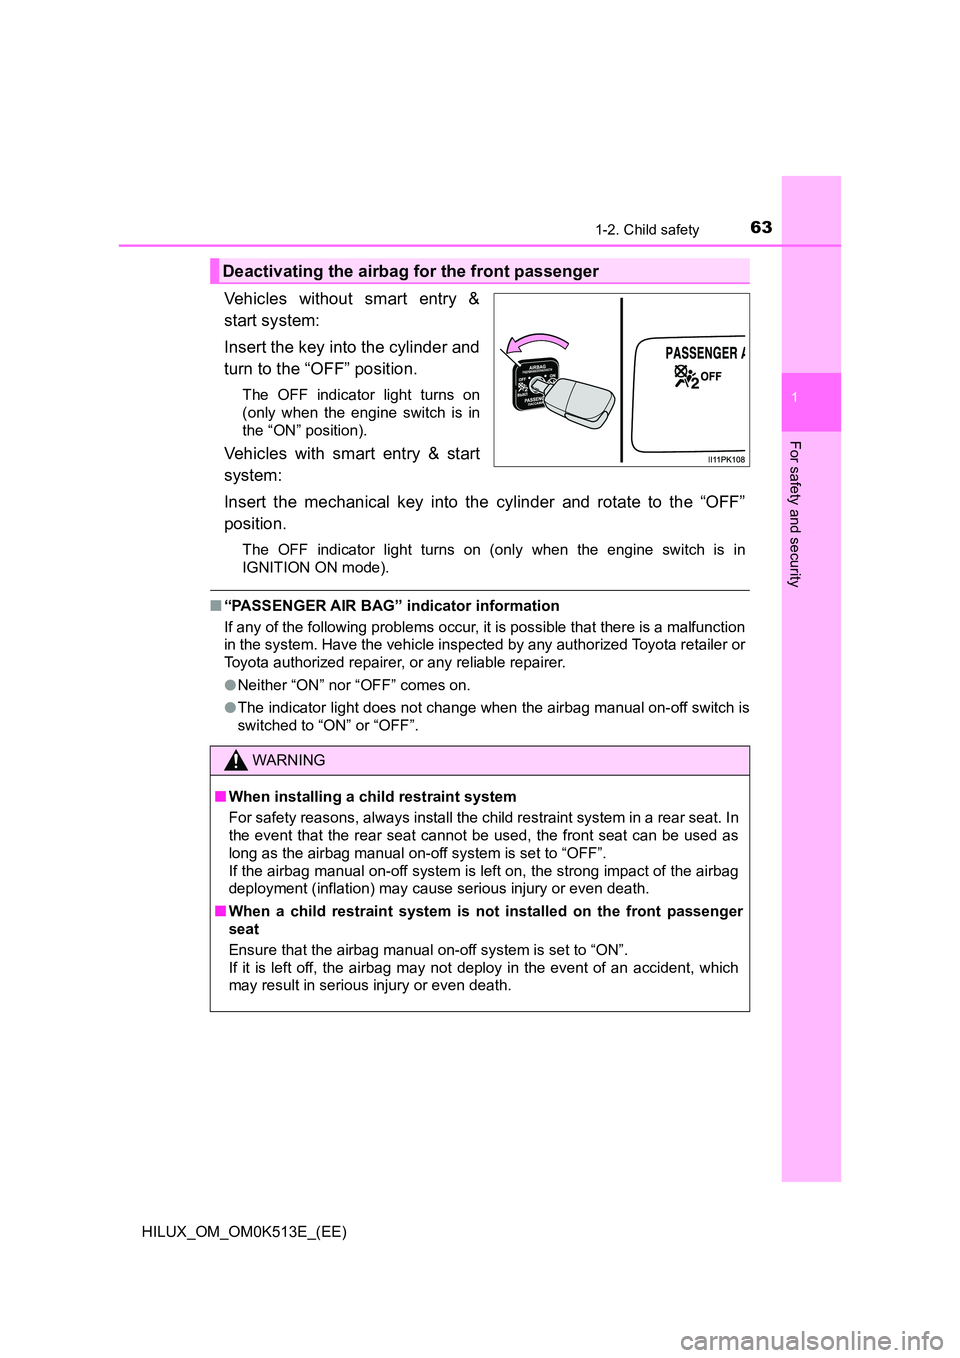 TOYOTA HILUX 2021  Owners Manual (in English) 631-2. Child safety
1
HILUX_OM_OM0K513E_(EE)
For safety and security
Vehicles without smart entry & 
start system: 
Insert the key into the cylinder and 
turn to the “OFF” position.
The OFF indica